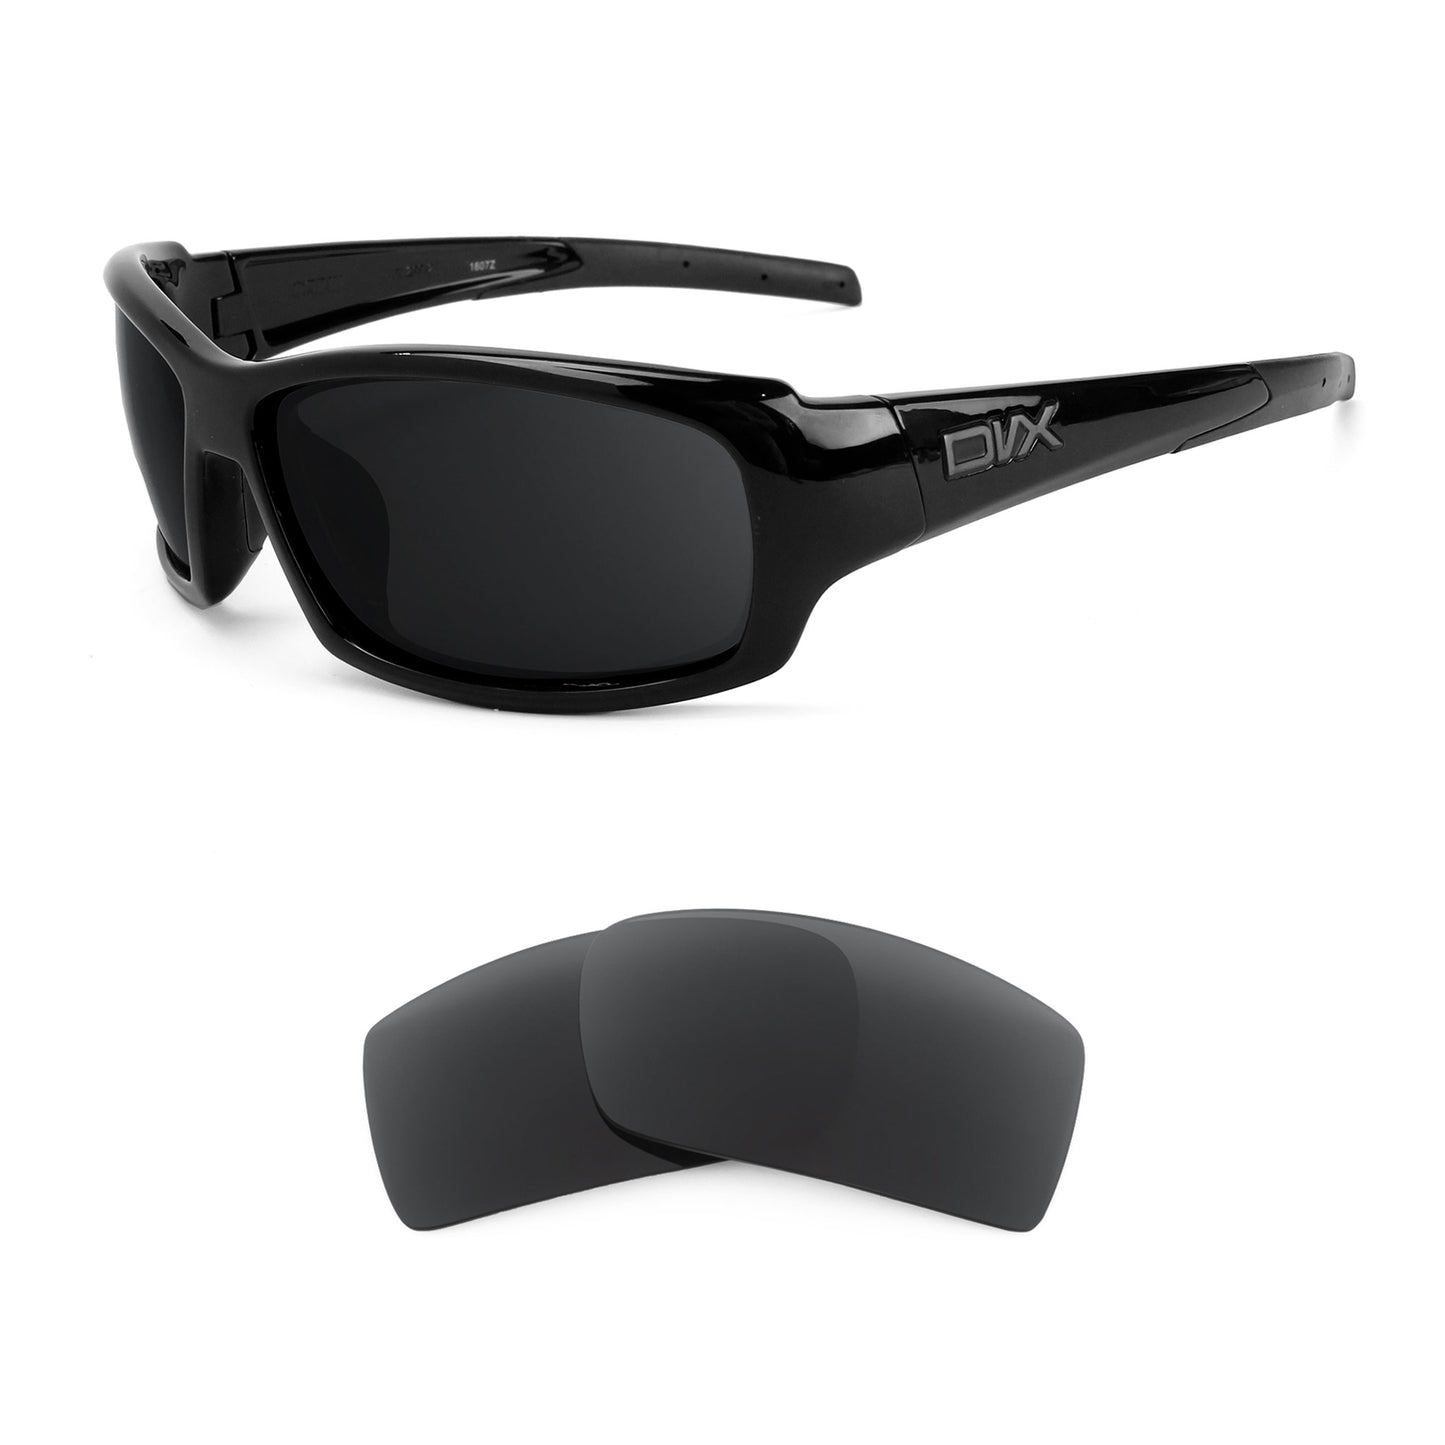 DVX Eyewear Oculus sunglasses with replacement lenses